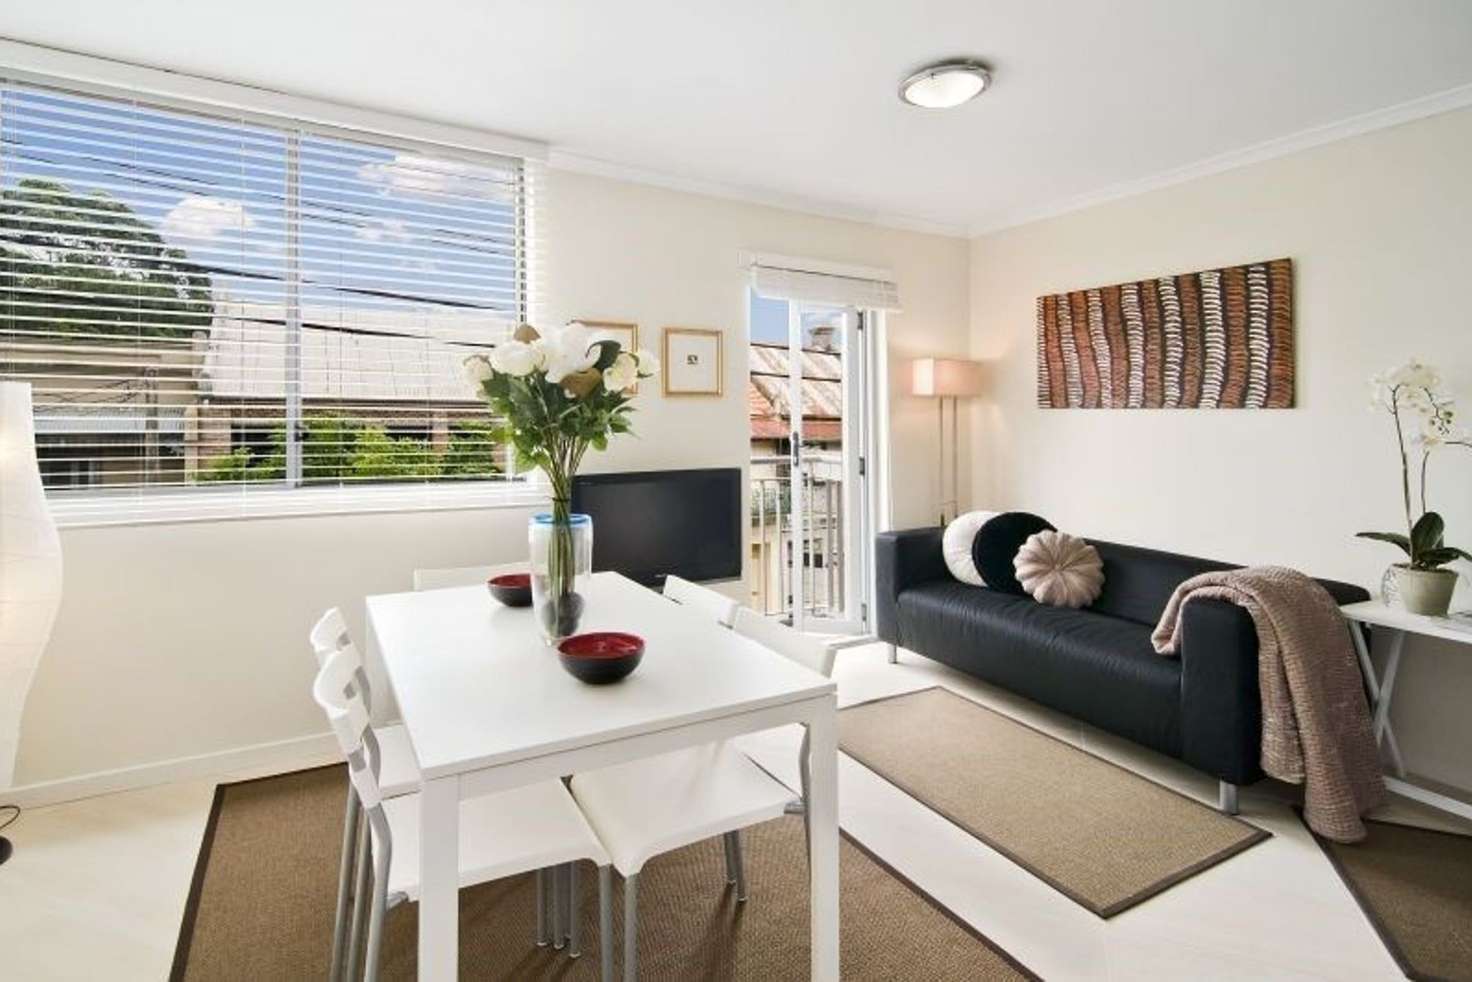 Main view of Homely apartment listing, 18/252 Abercrombie St, Redfern NSW 2016